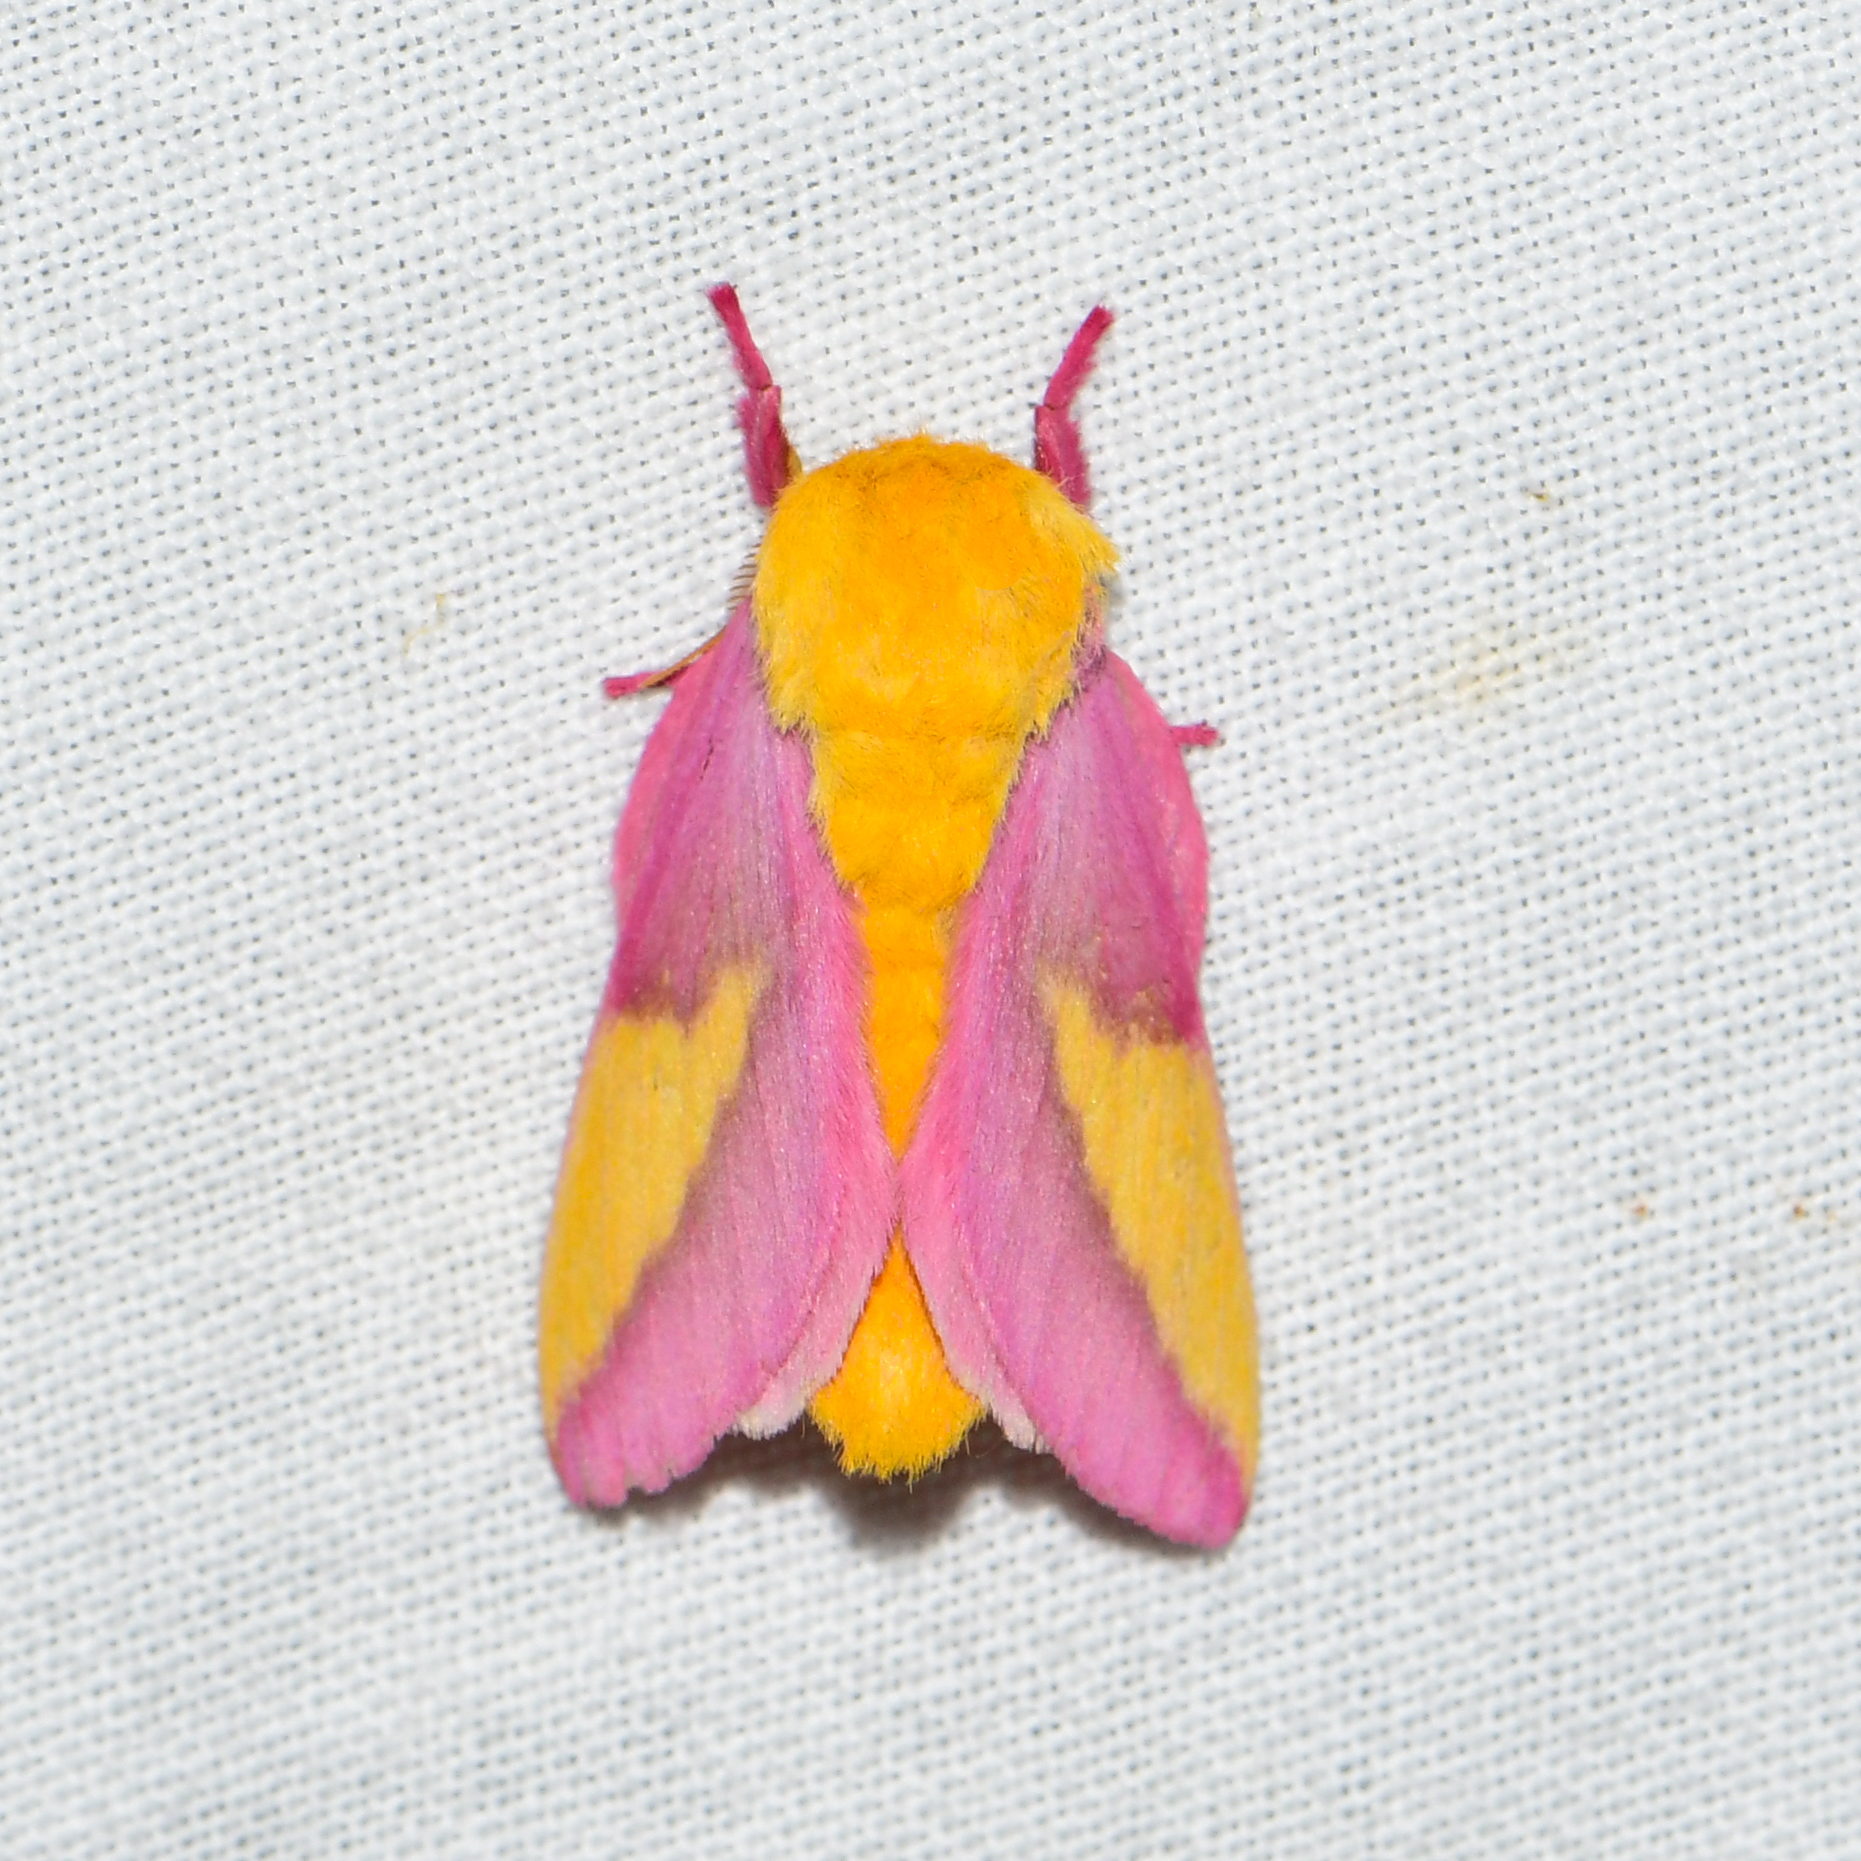 519 Maple Moth Images, Stock Photos, 3D objects, & Vectors